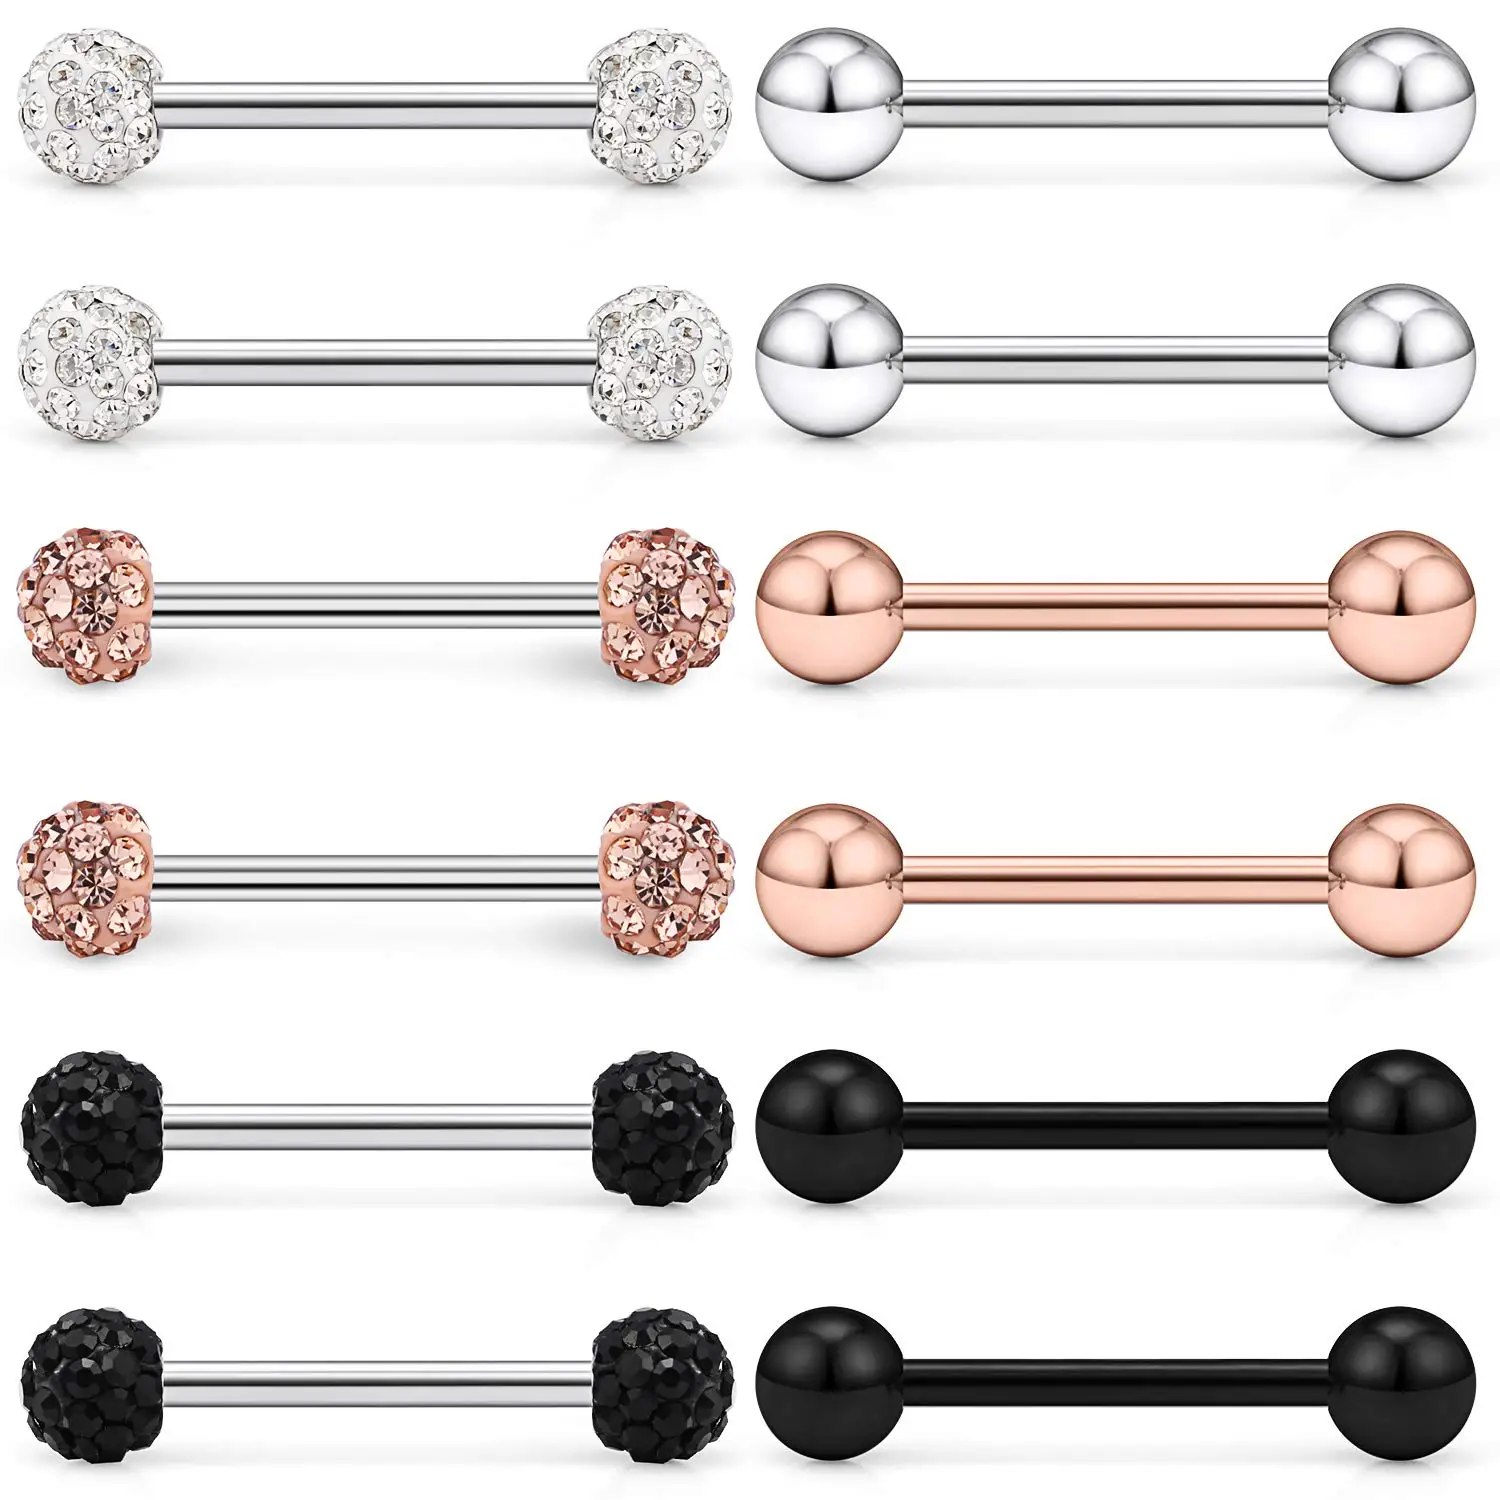 

12 Pieces Medical Steel Tongue Ring Nipple Barbell Ring Body Piercing Jewelry Kit Cartilage Spiral Metal Crystal Cubic Zirconia